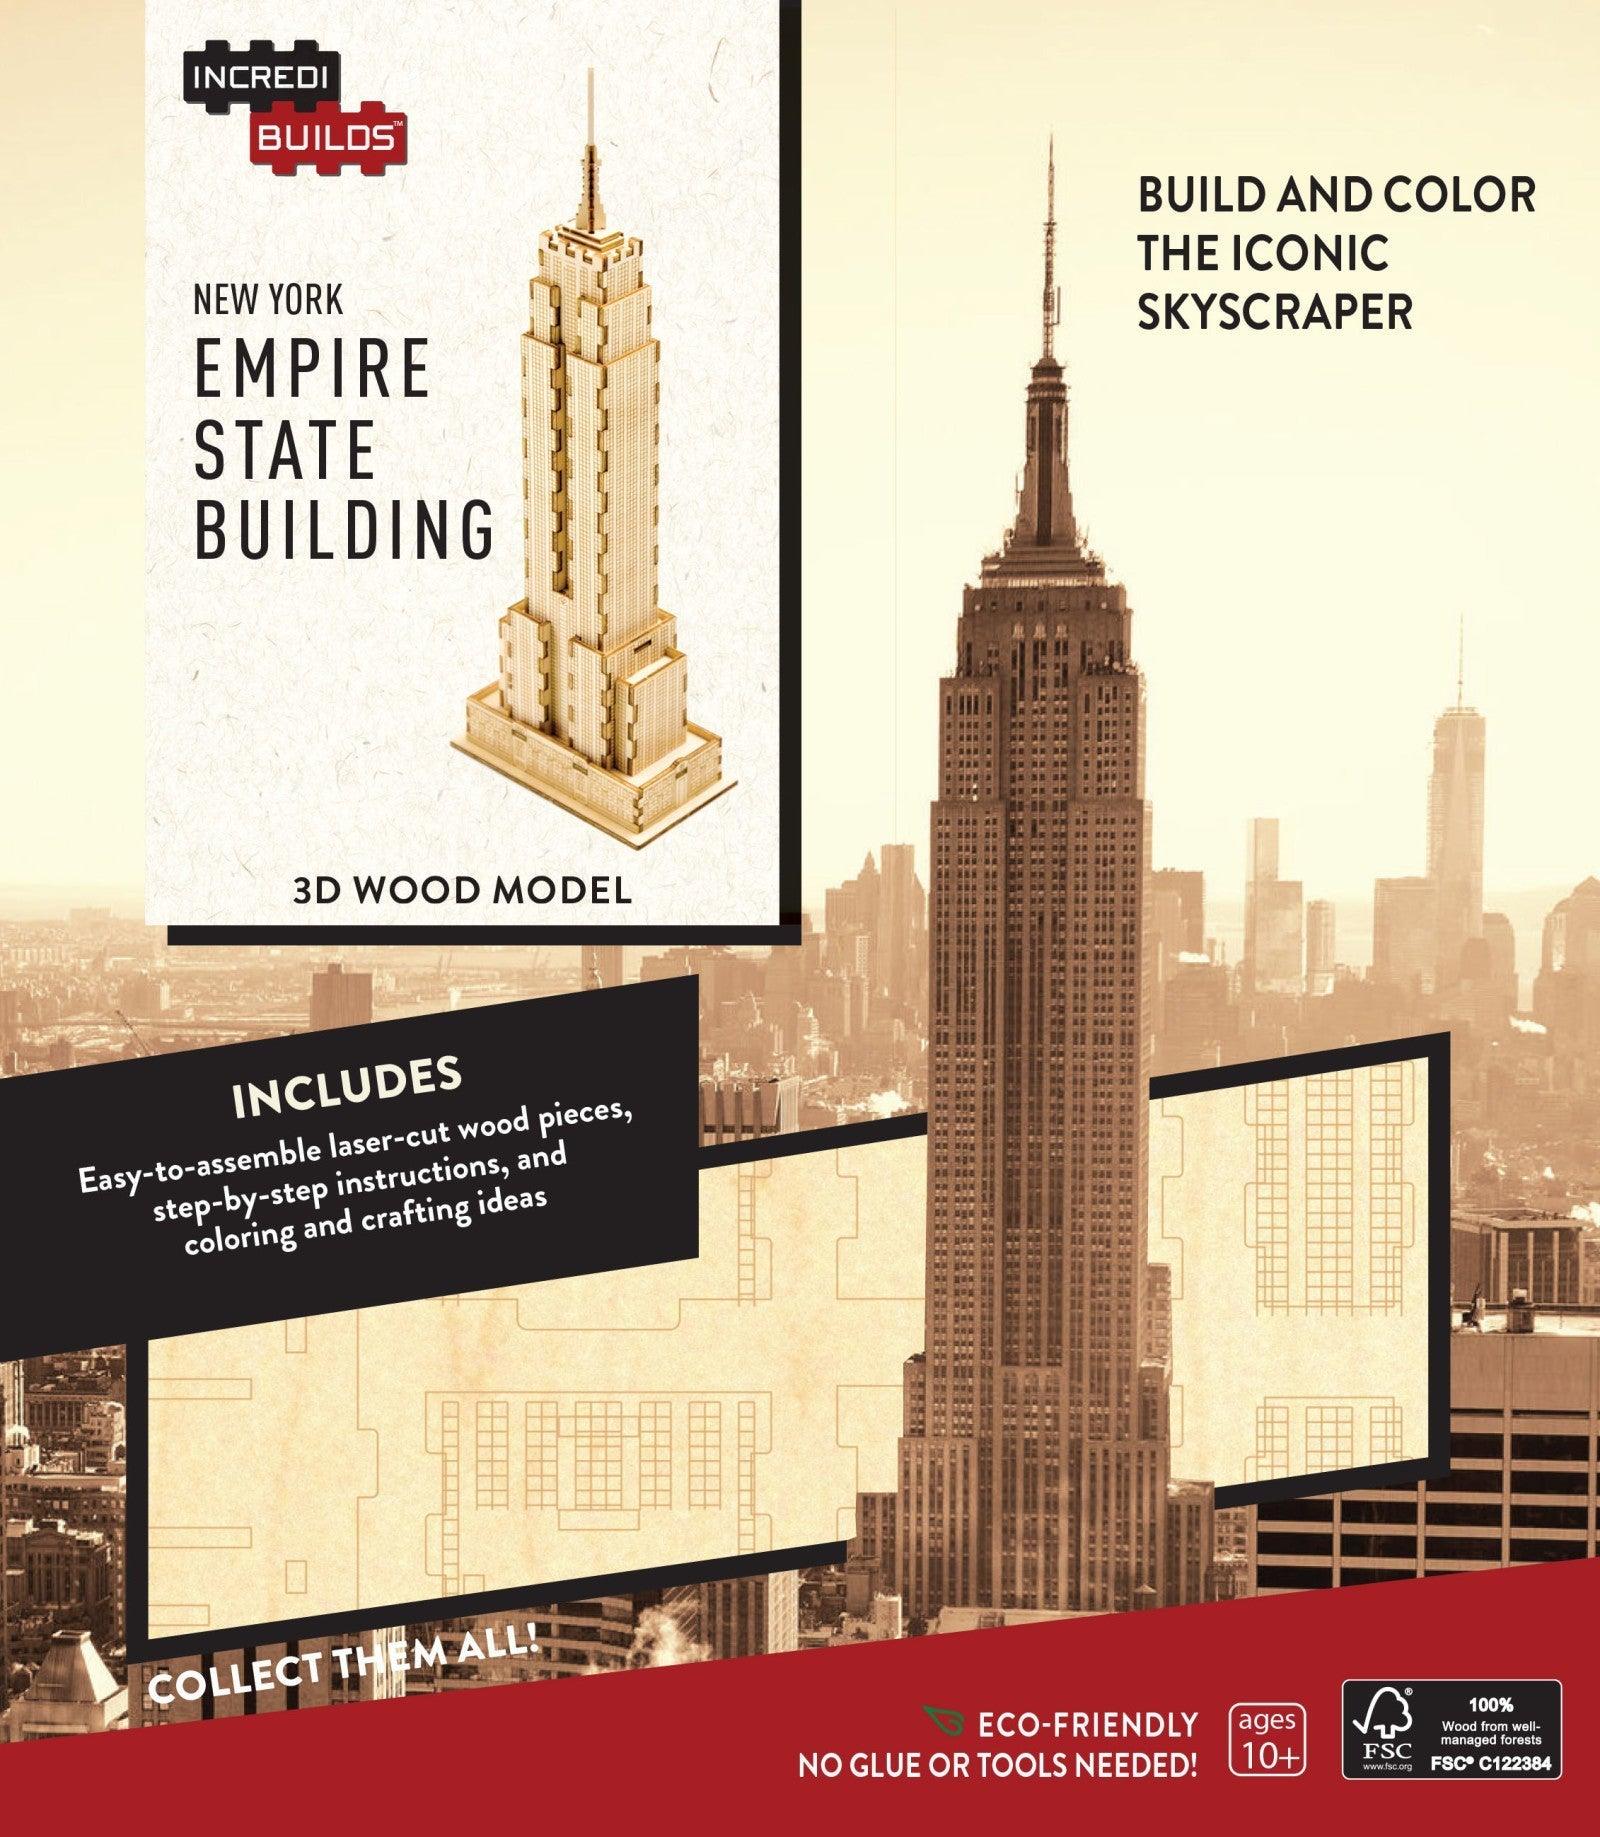 VR-42849 Incredibuilds New York Empire State Building 3D Wood Model - Insight Editions - Titan Pop Culture